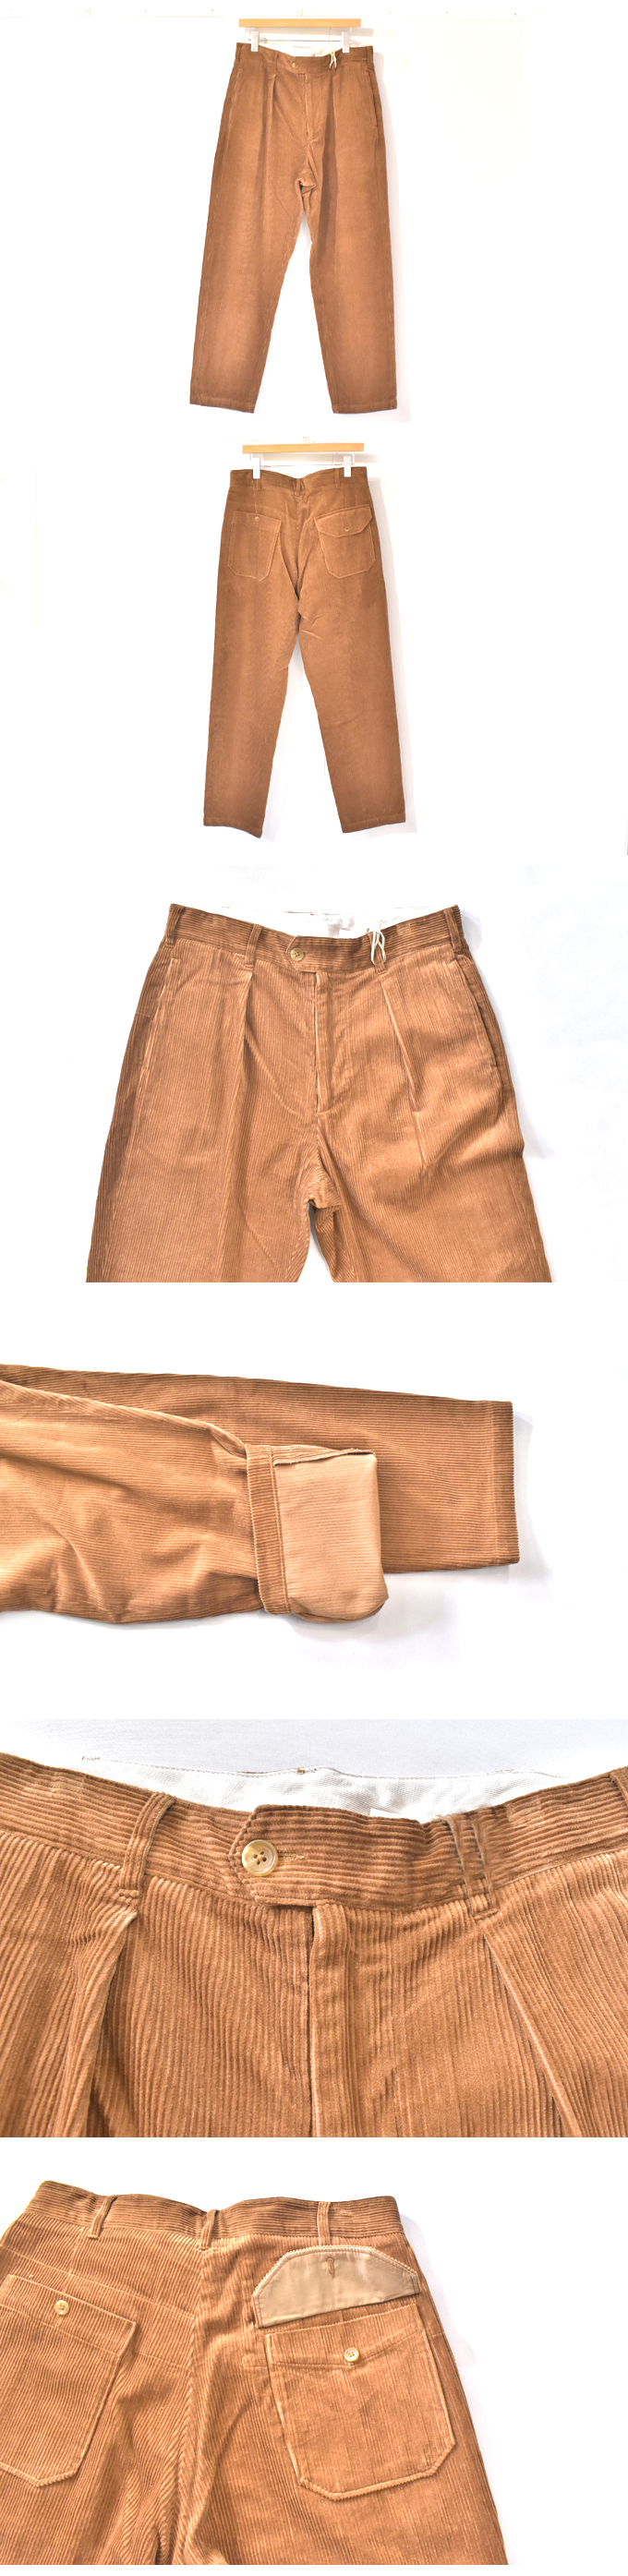 ENGINEERED GARMENTS CARLYLE PANT - COTTON 8W CORDUROY